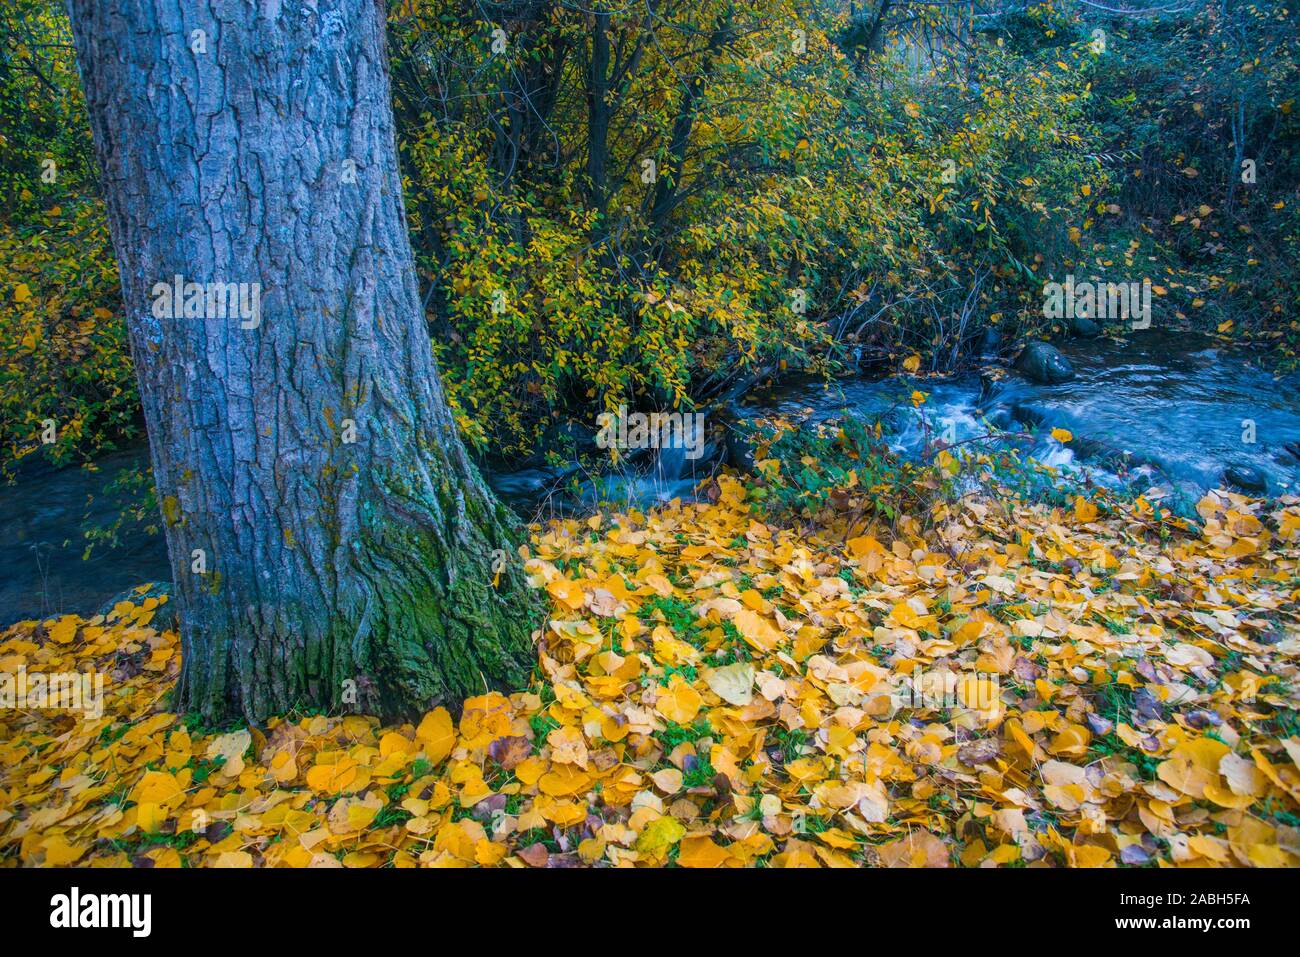 Tree trunk and fallen leaves in Autumn. Stock Photo